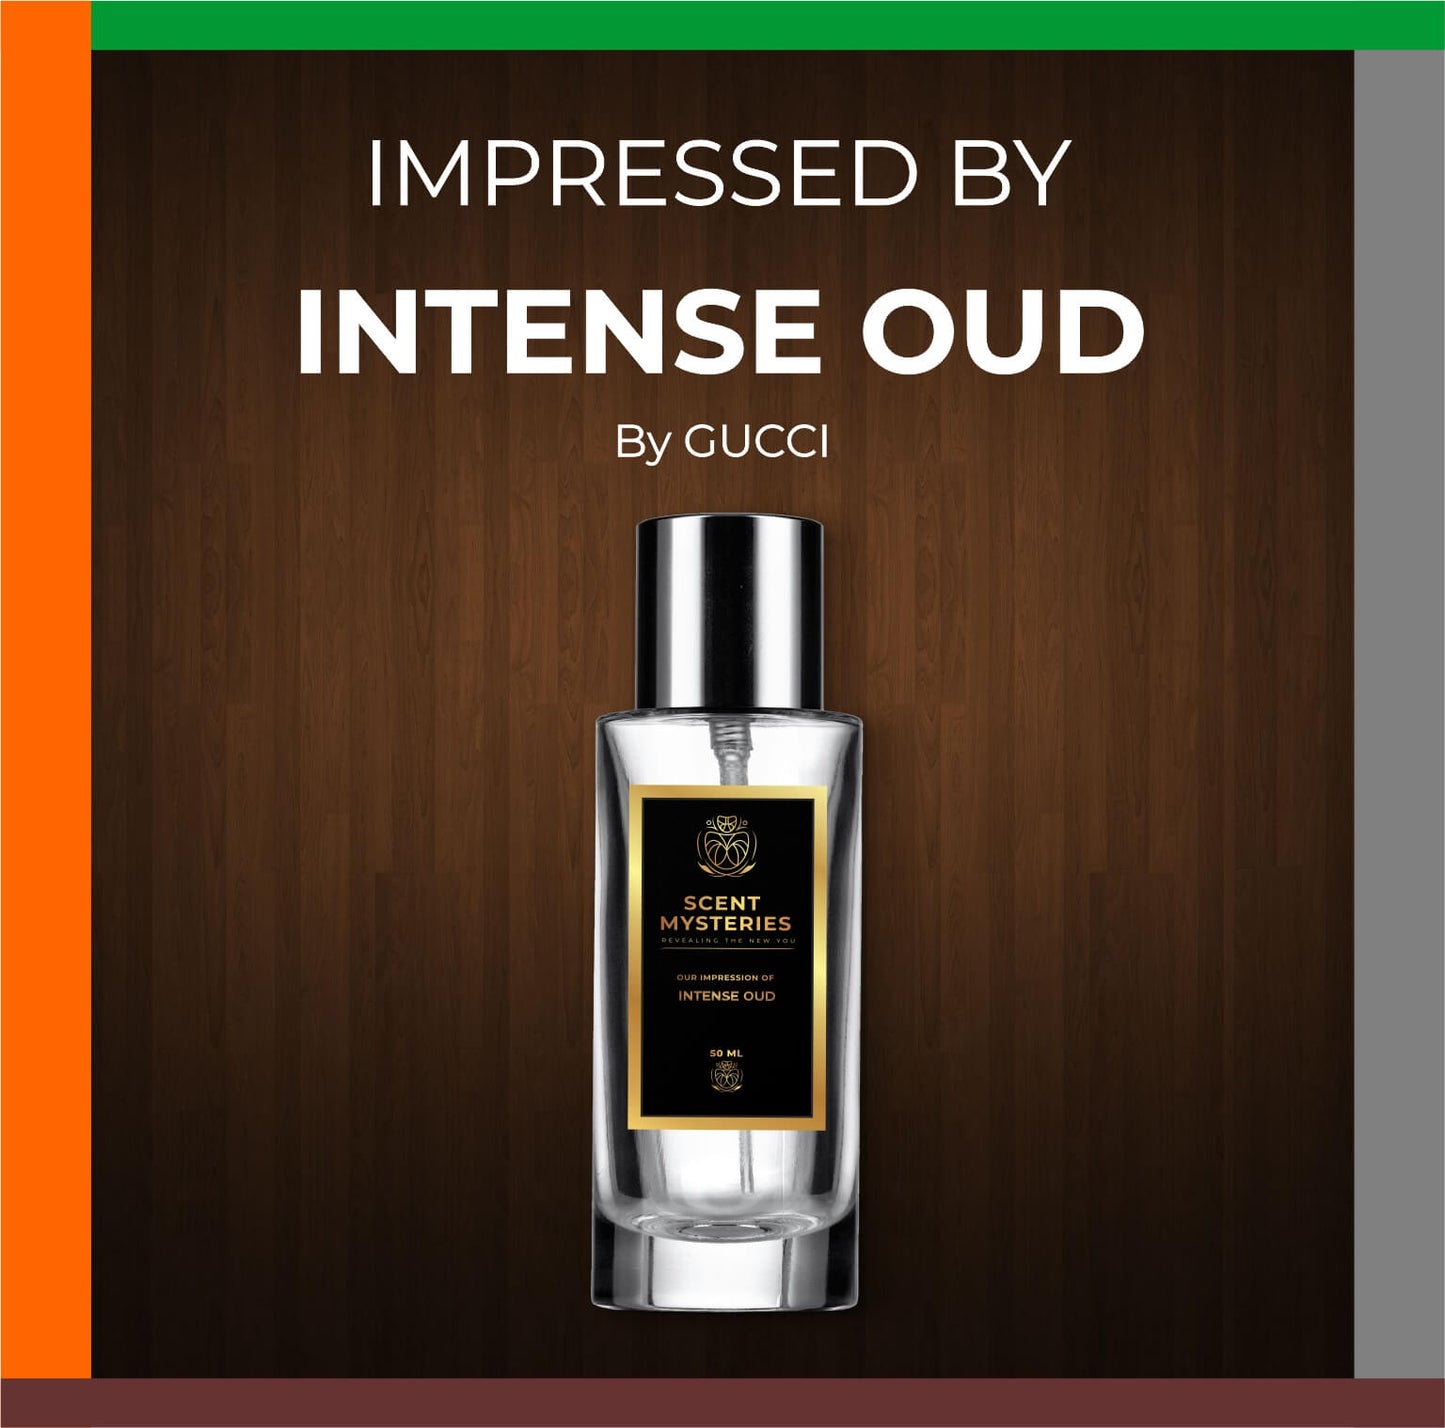 Our Impression of Intense Oud